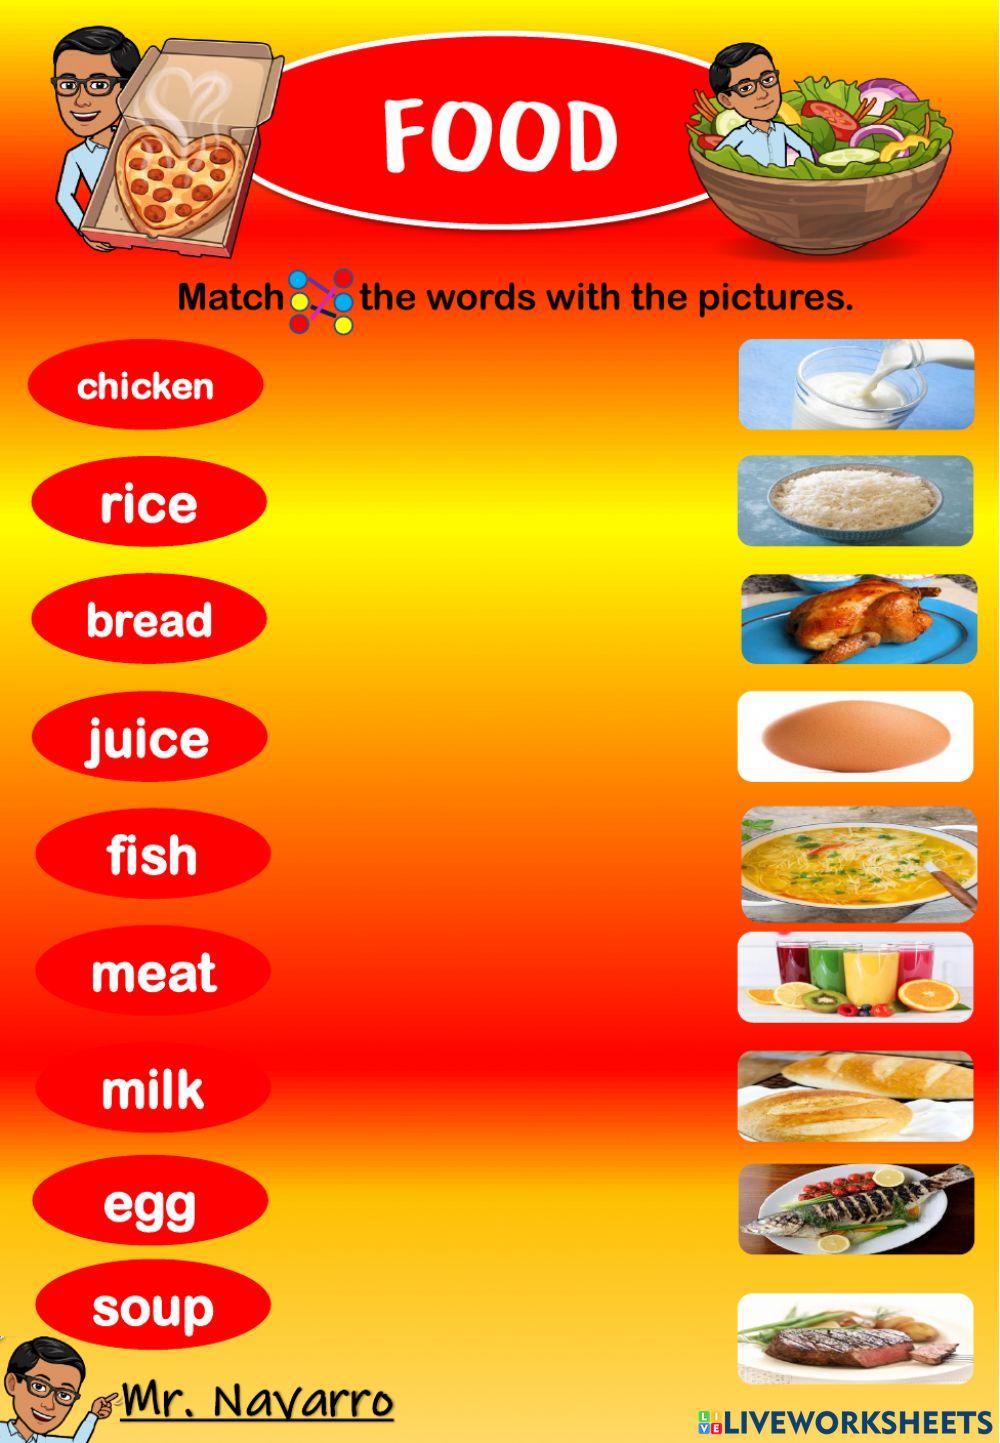 Food (Match the words with the pictures)